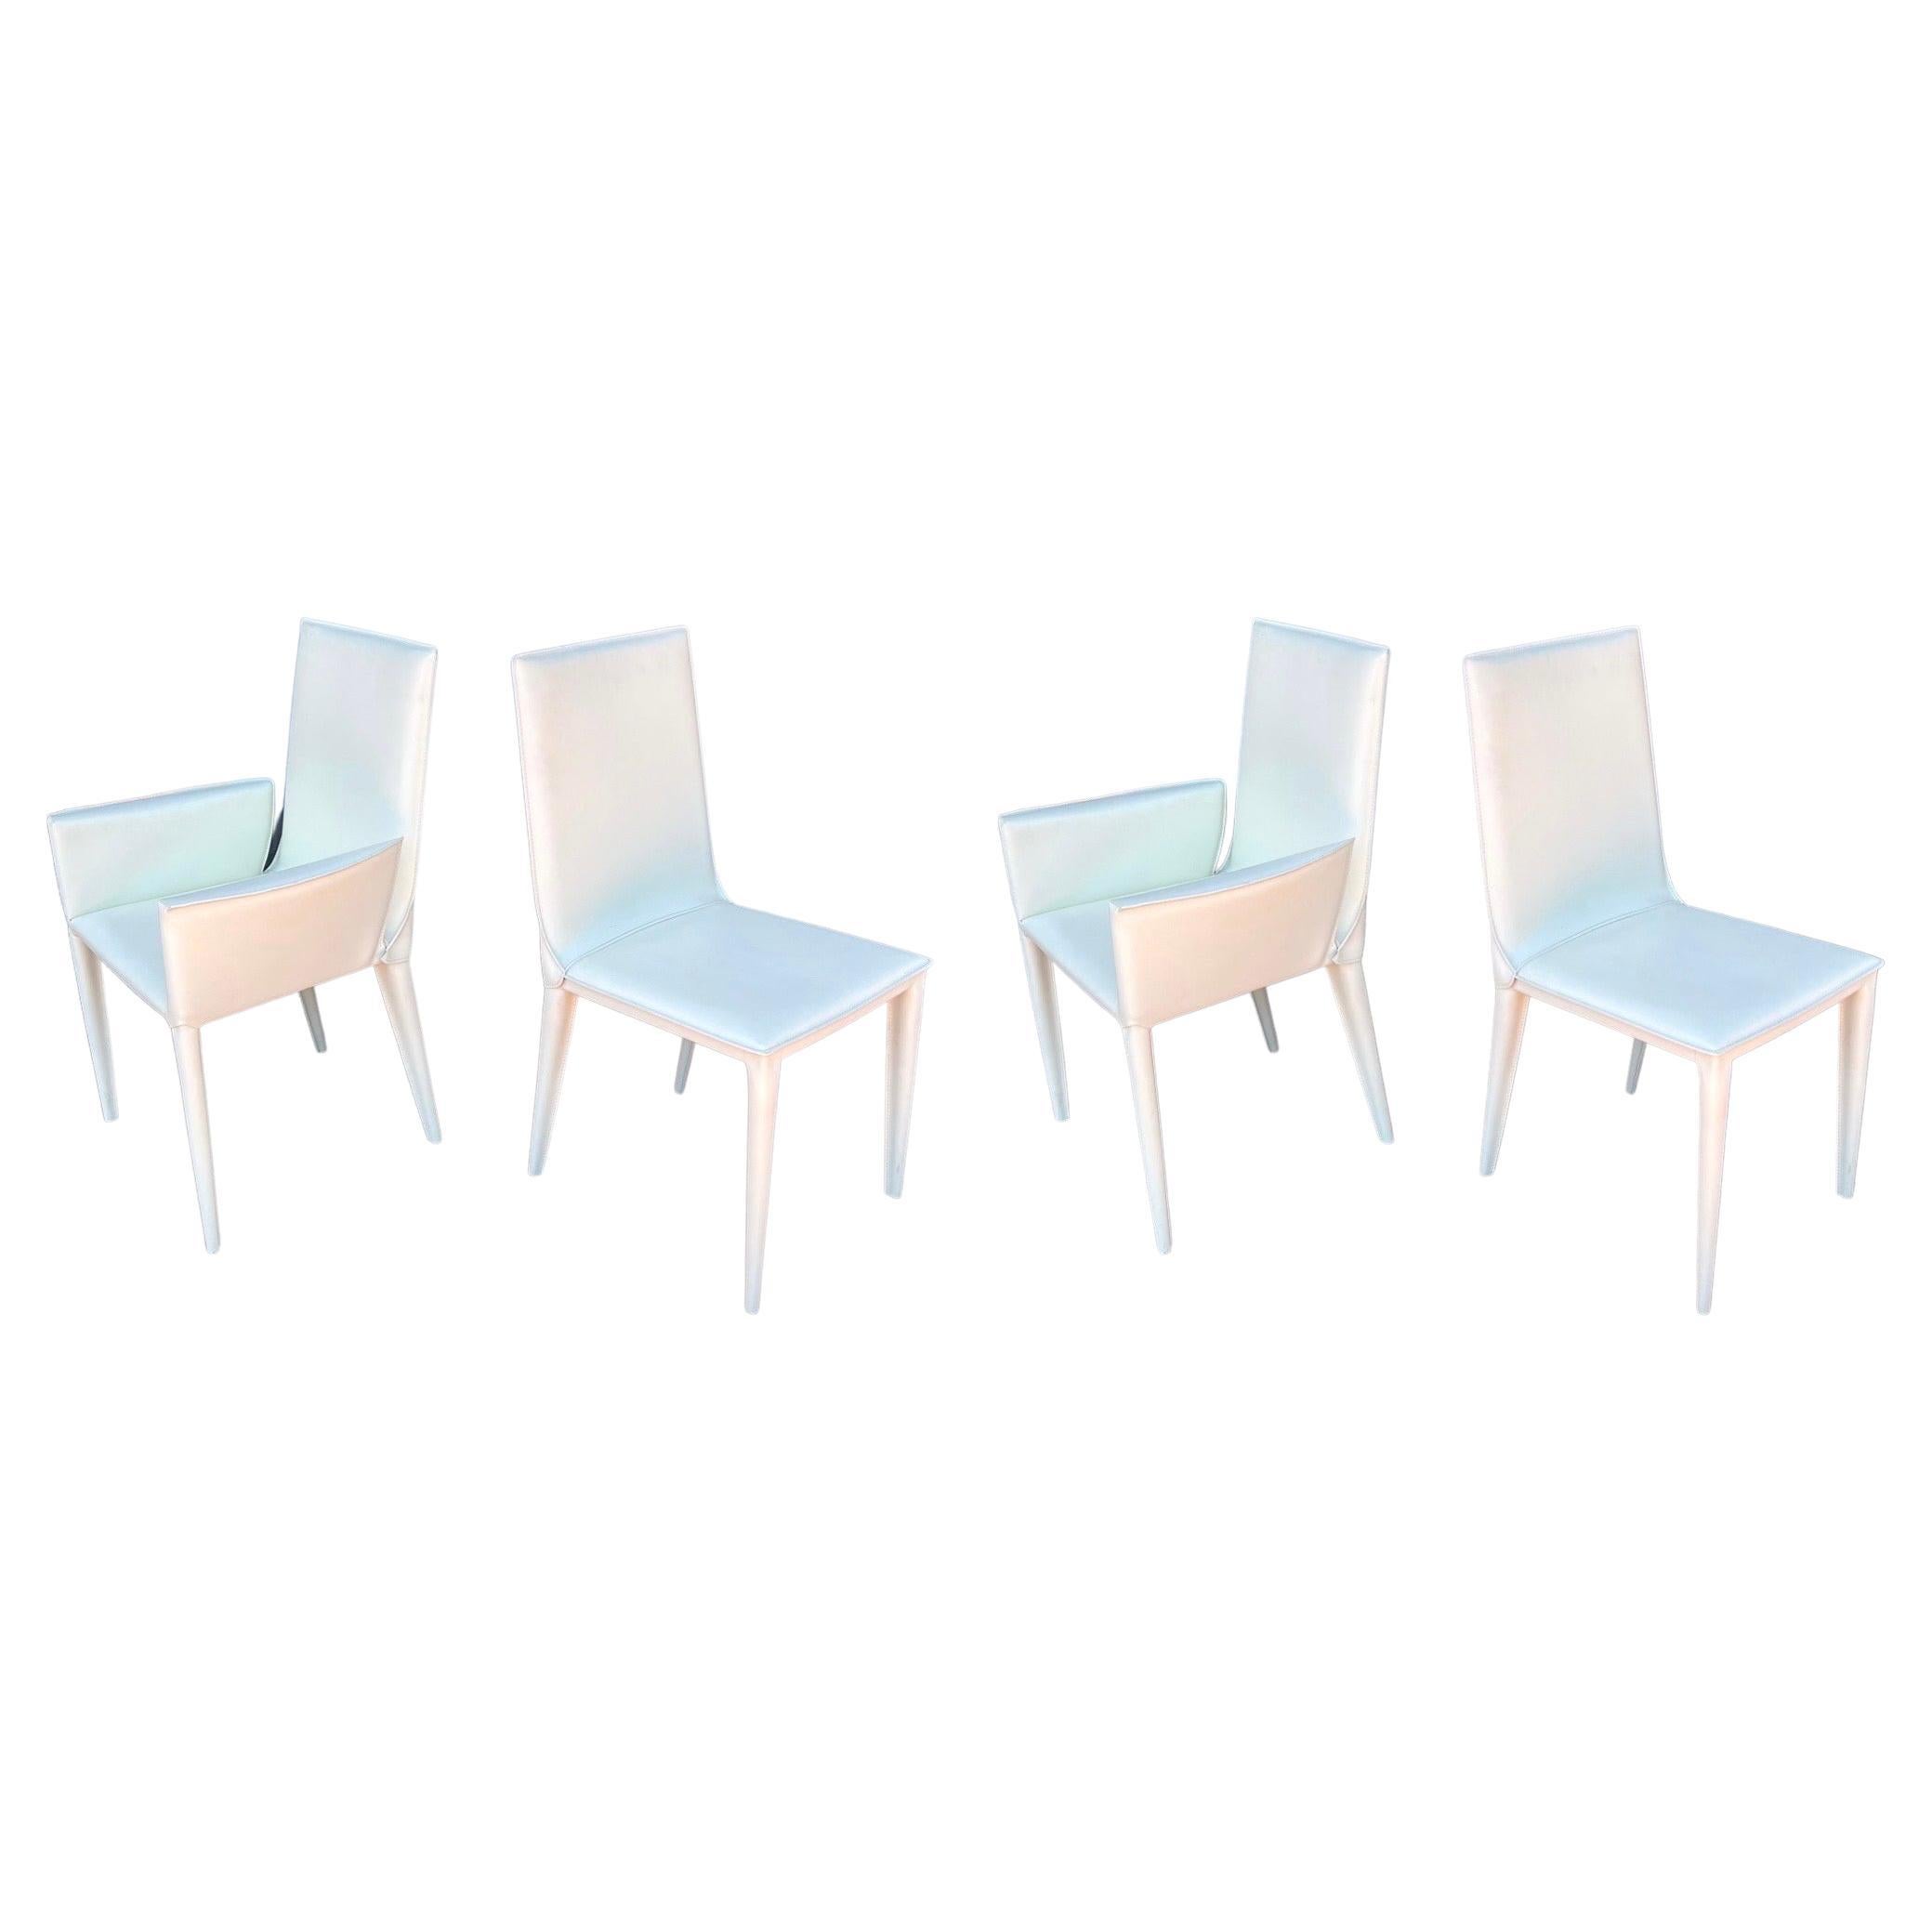 Postmodern Set of 4 Chairs in White Leather Bottega by Frag, Italy